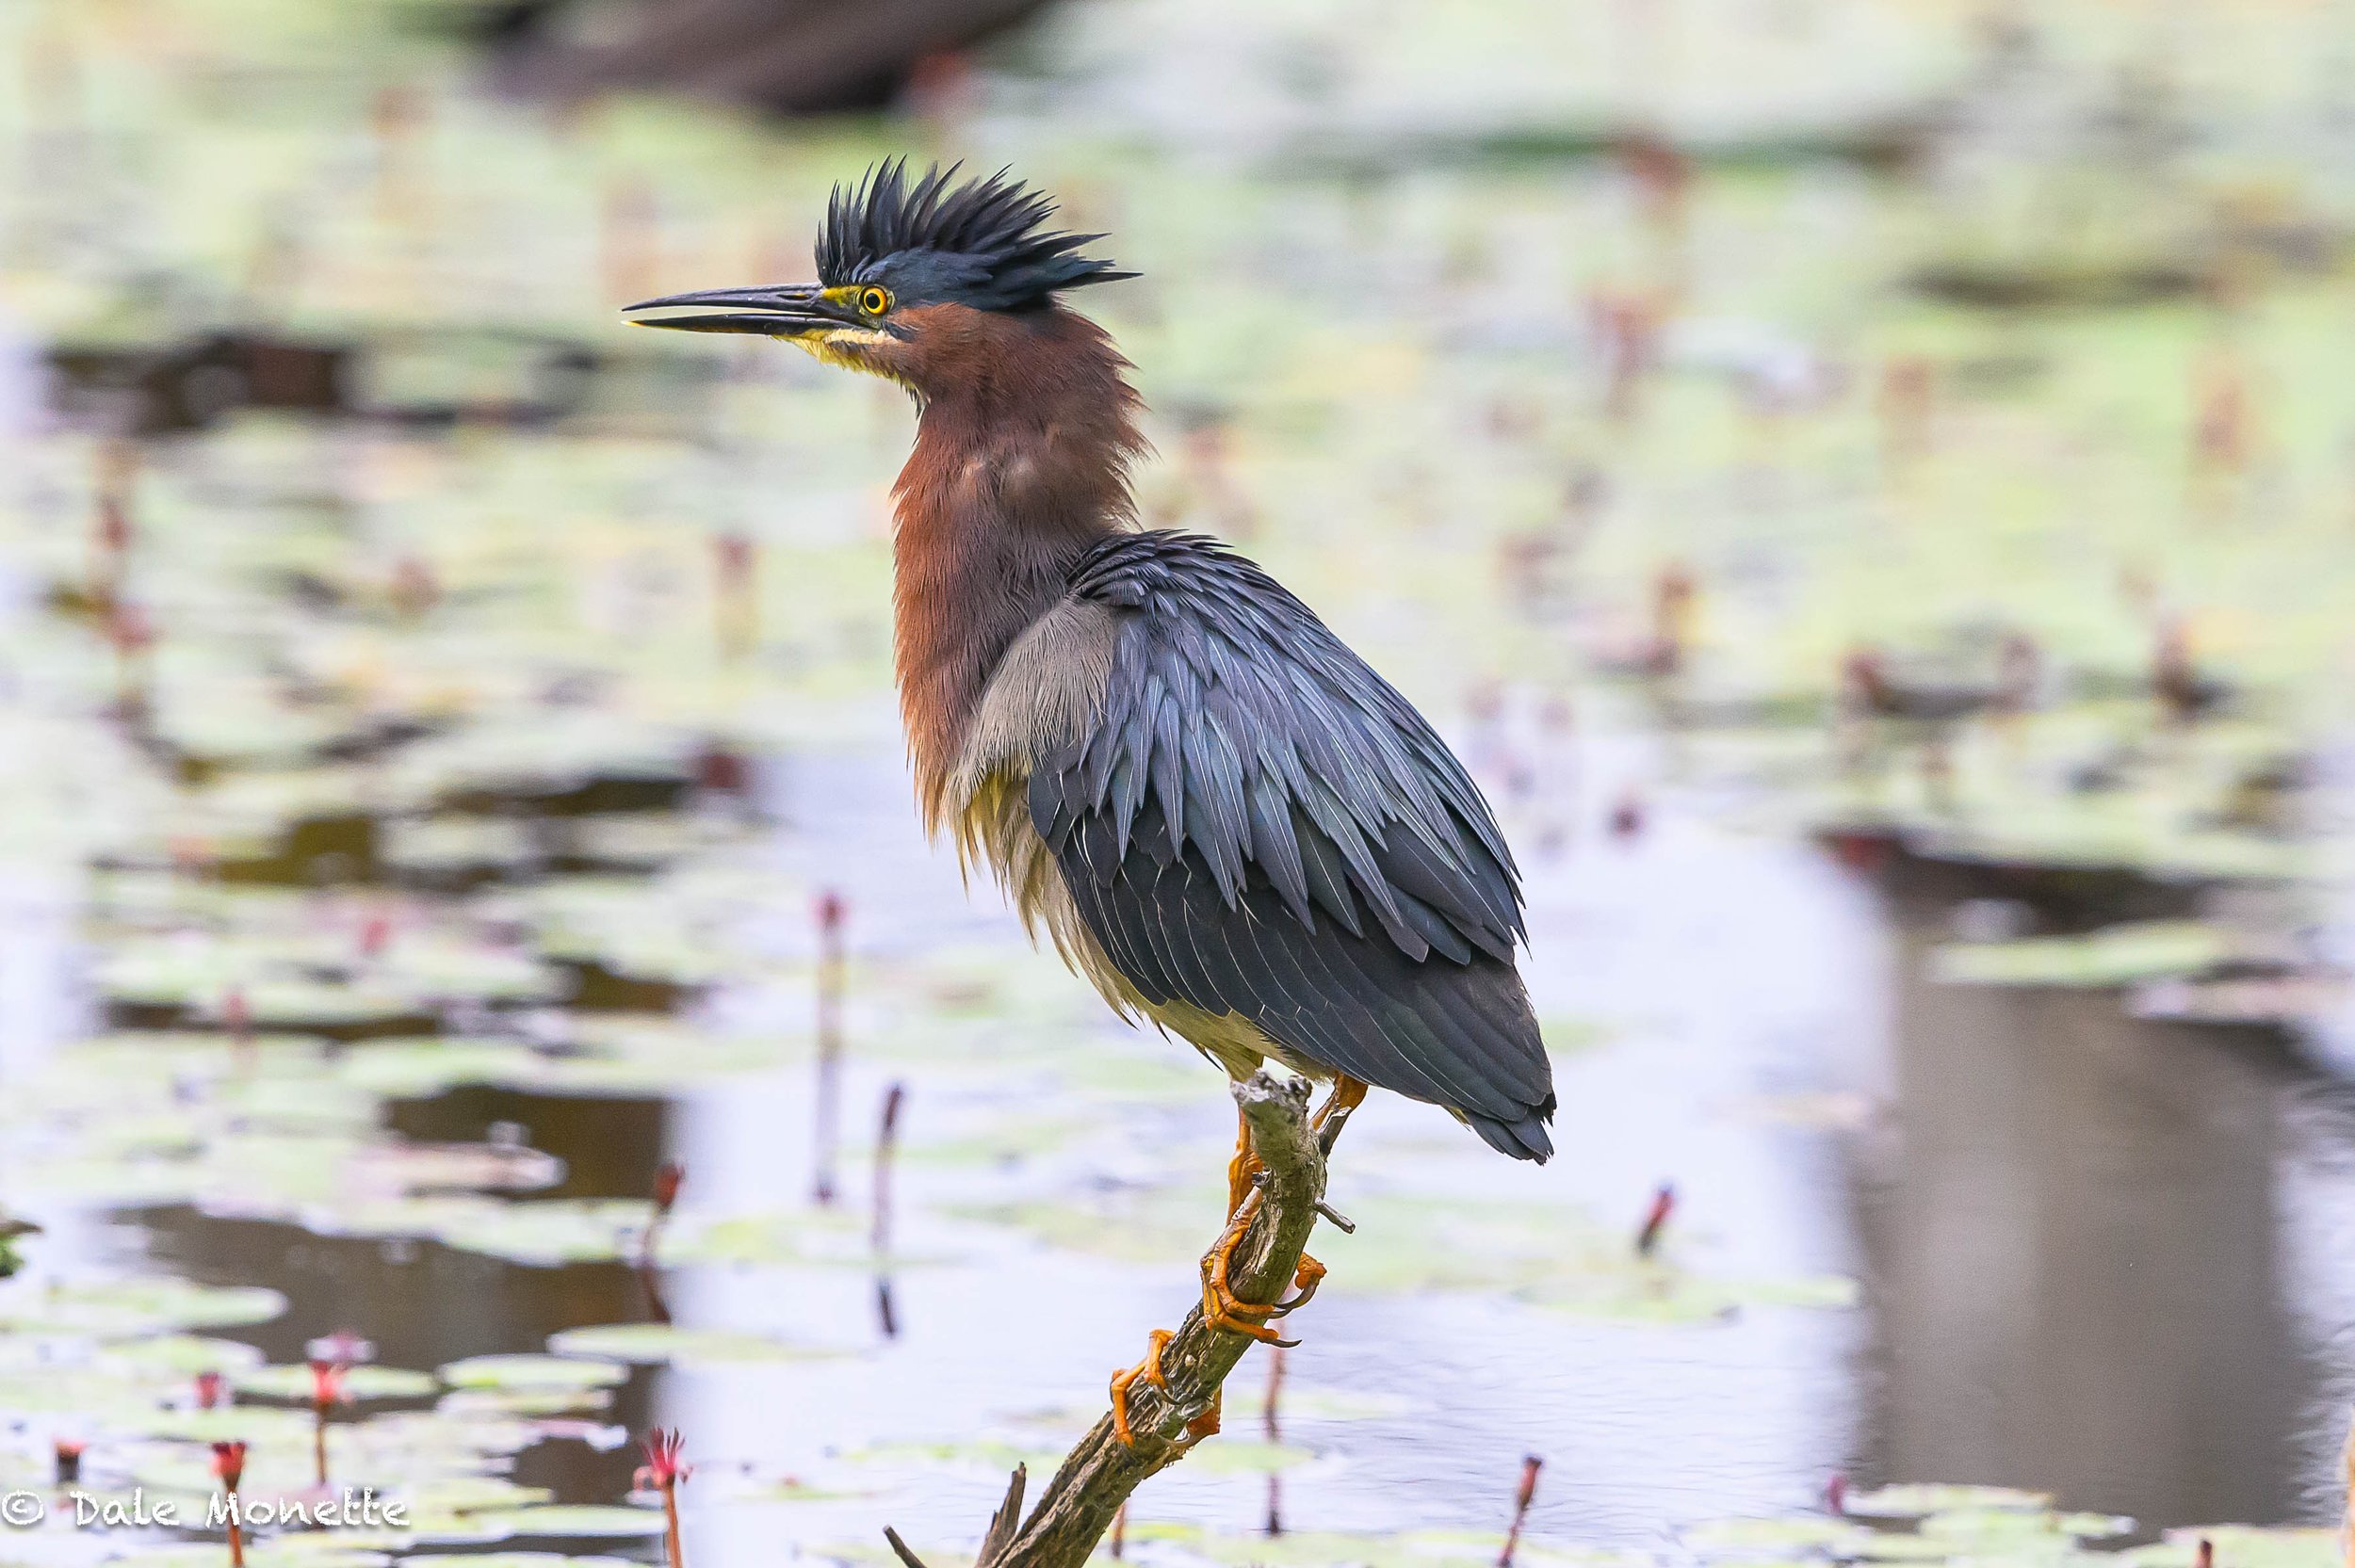   Green Heron,  getting ready for more hunting.  